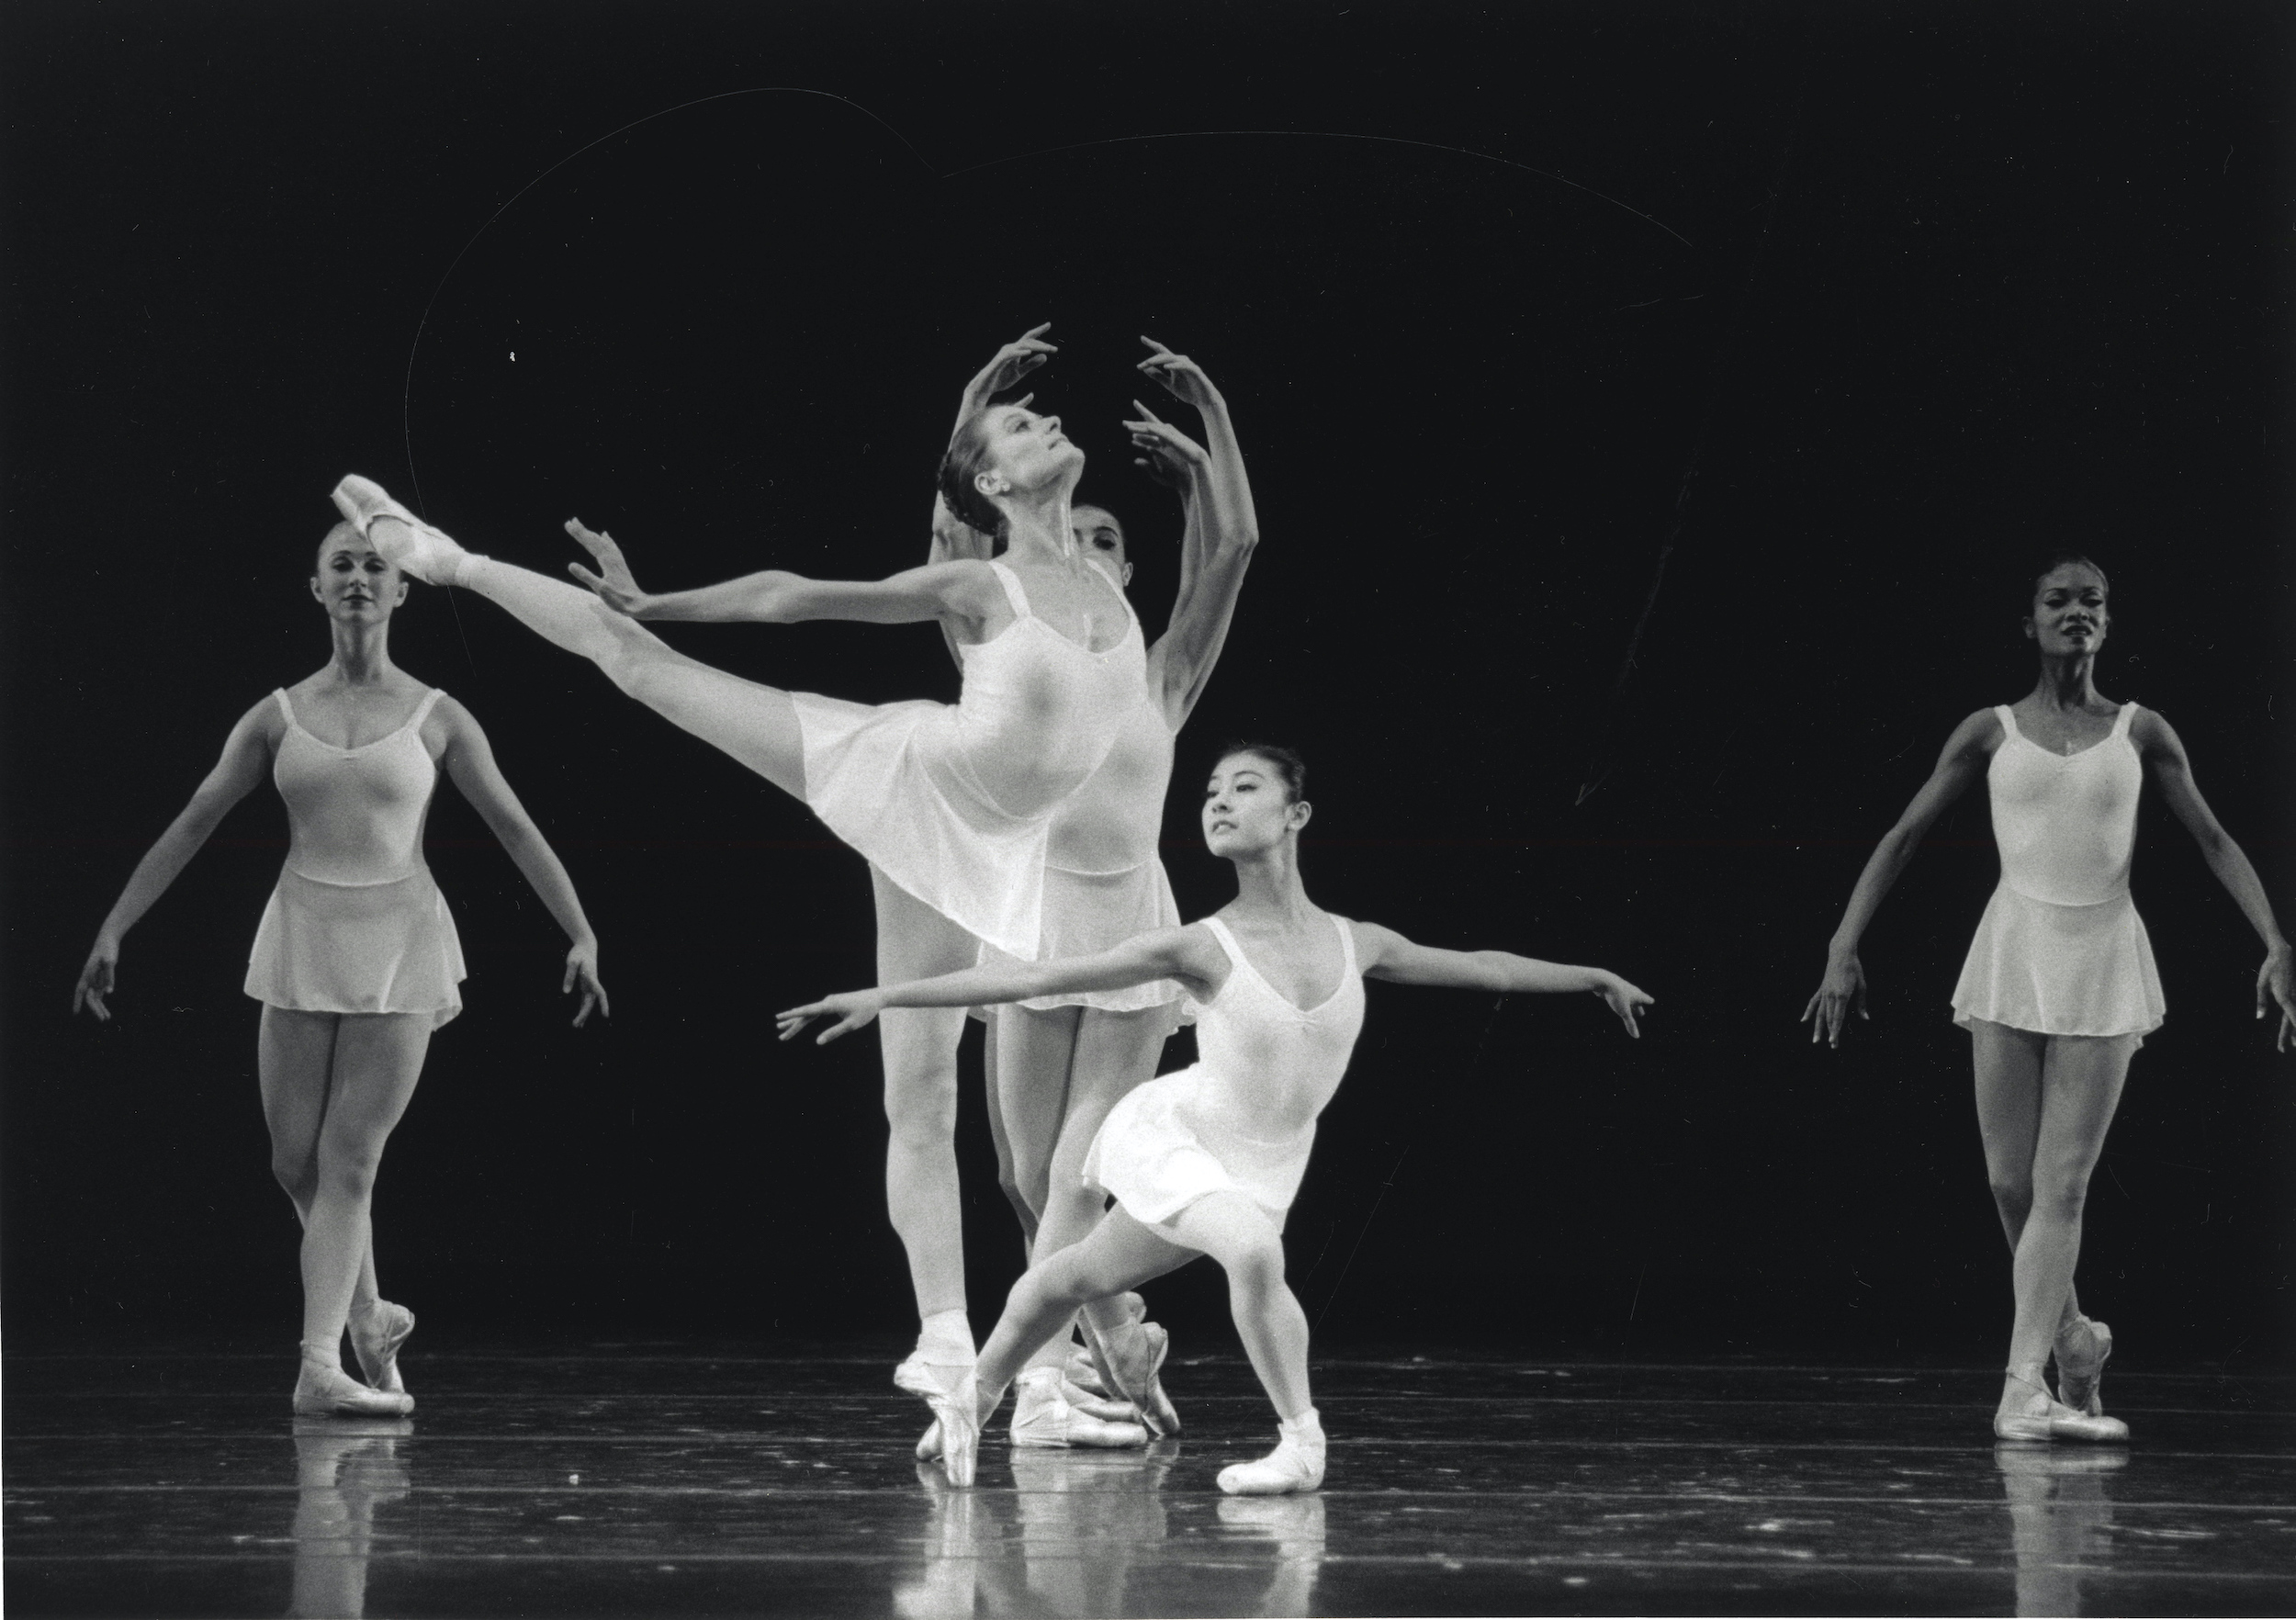 In this black and white photo, YUan YUan Tan lunges low on her right leg, stretching her left leg out diagonally behind her and her arms out to the side as she looks over her right shoulder. Muriel Maffre does an arabesque on pointe next to Tan on her right side, pressing both arms back and looking up. Three women stand in B plus behind them onstage. All of the dancers wear white leotards and short white skirts, tights and pointe shoes.